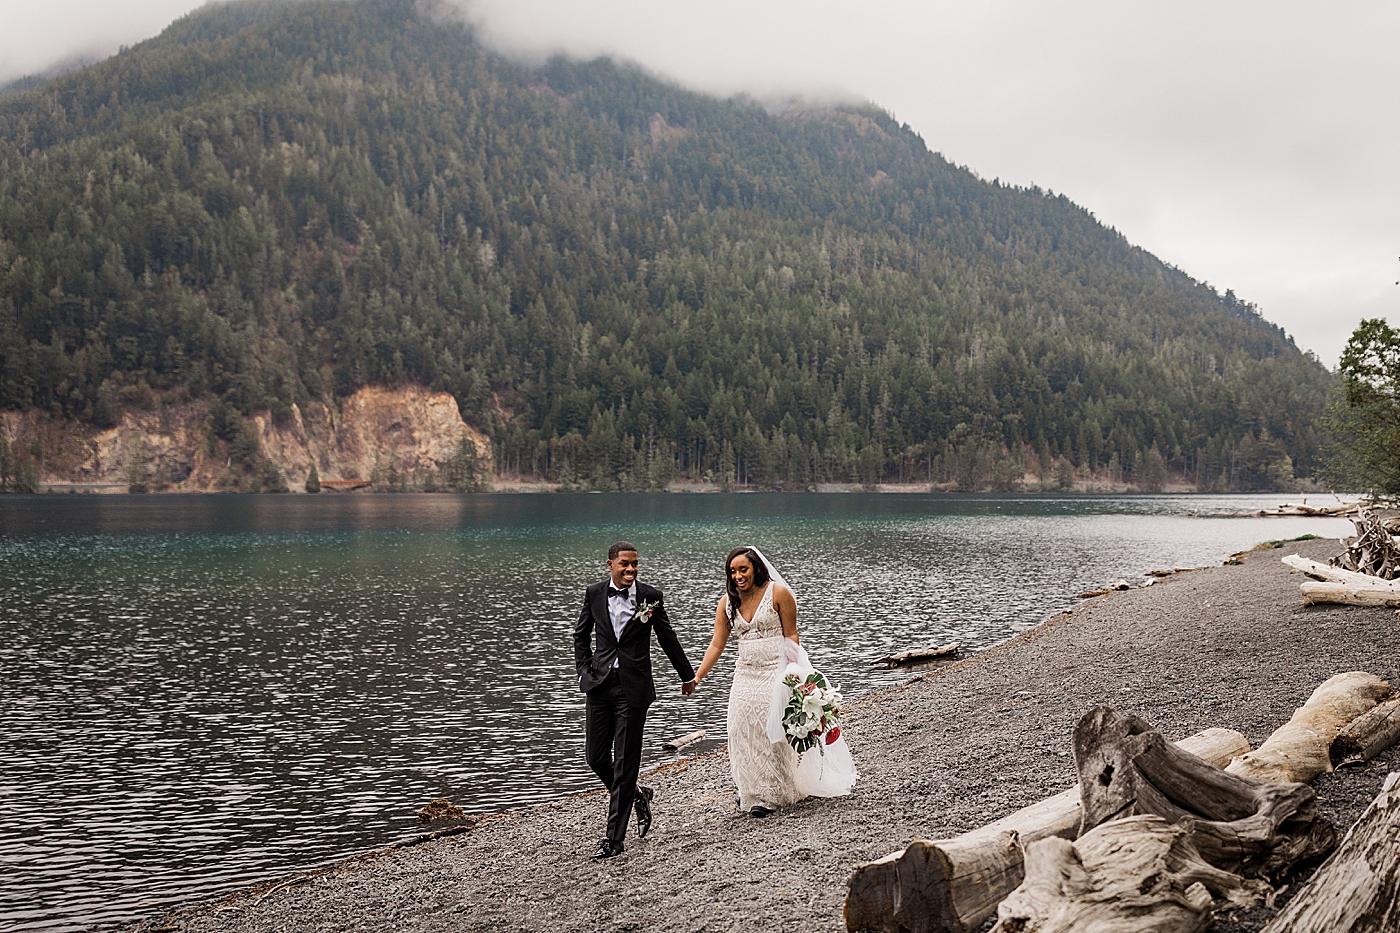 Bride and groom portraits during elopement in the Olympic National Park. Photo by Megan Montalvo Photography.